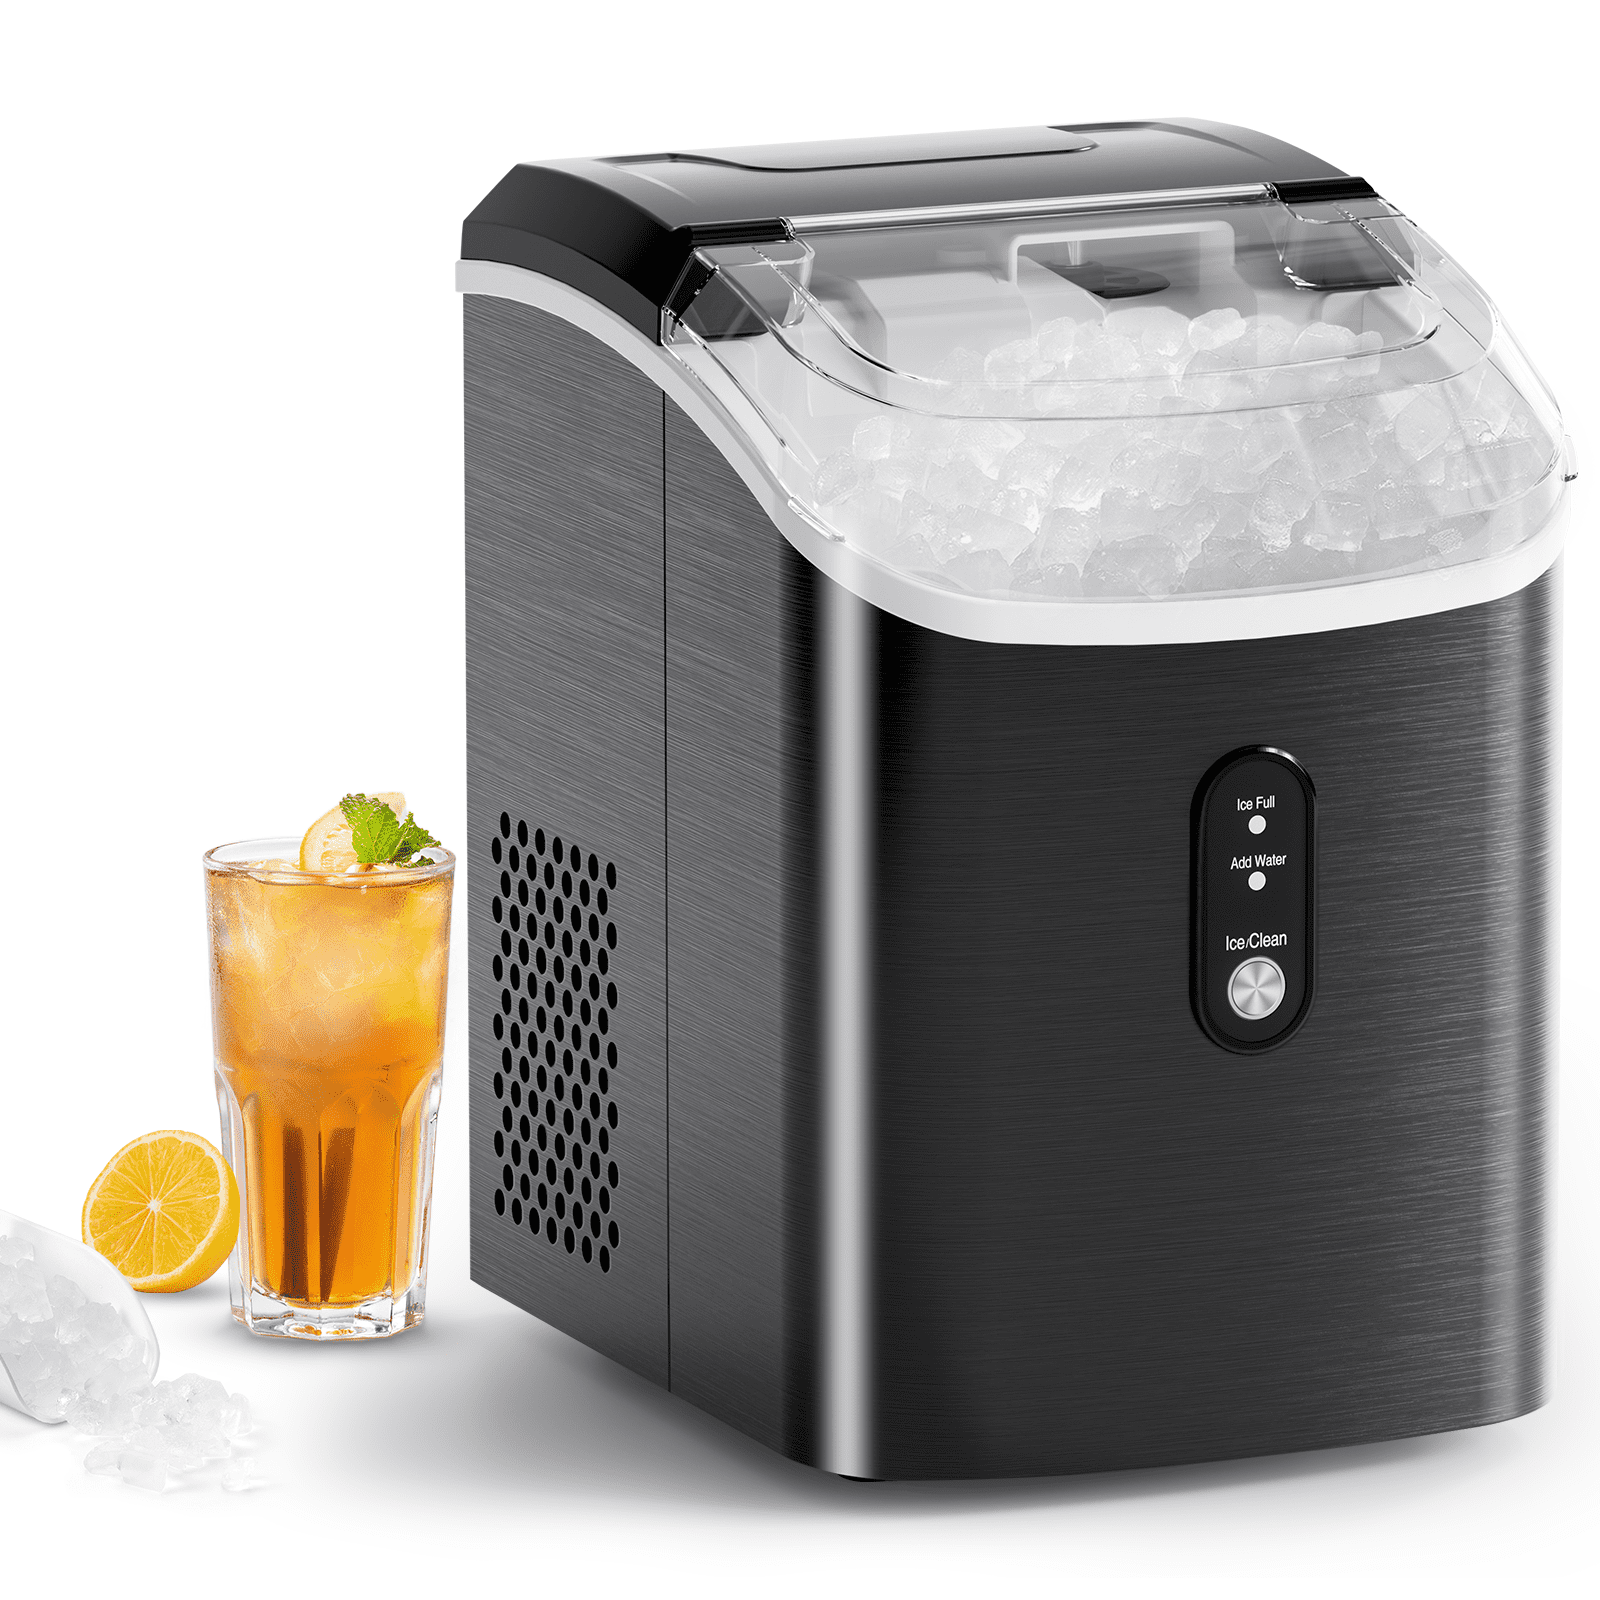  Joy Pebble Stainless Steel Ice Makers Countertop, 26Lbs/24H, 9  Cubes Ready in 6-8 Mins, Self-Cleaning Portable Ice Maker with Handle, for  Home/Office/Bar (Black) : Appliances